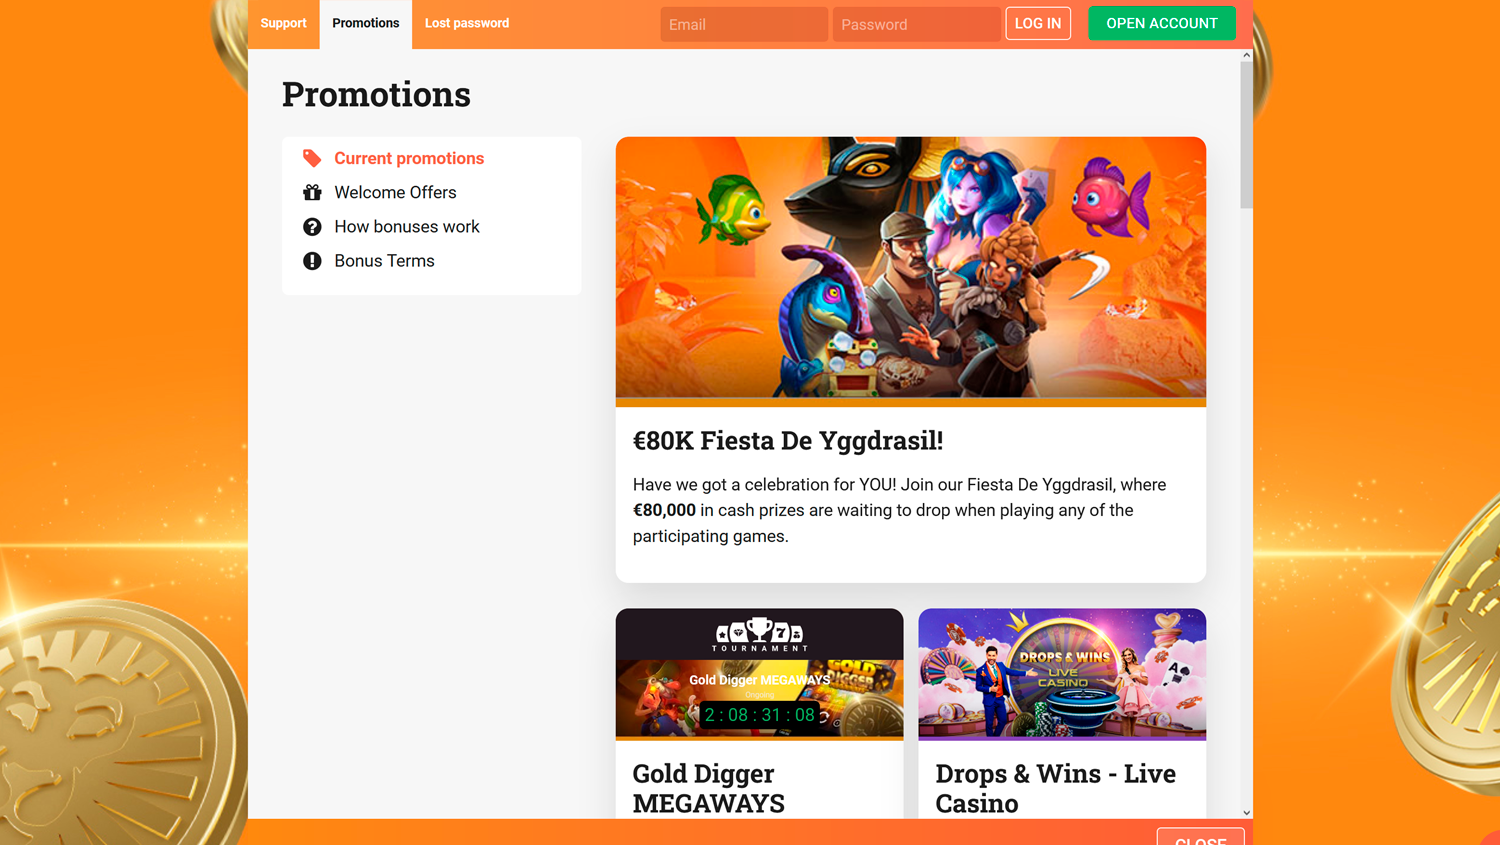 Promotions page on Leo Vegas Casino Site